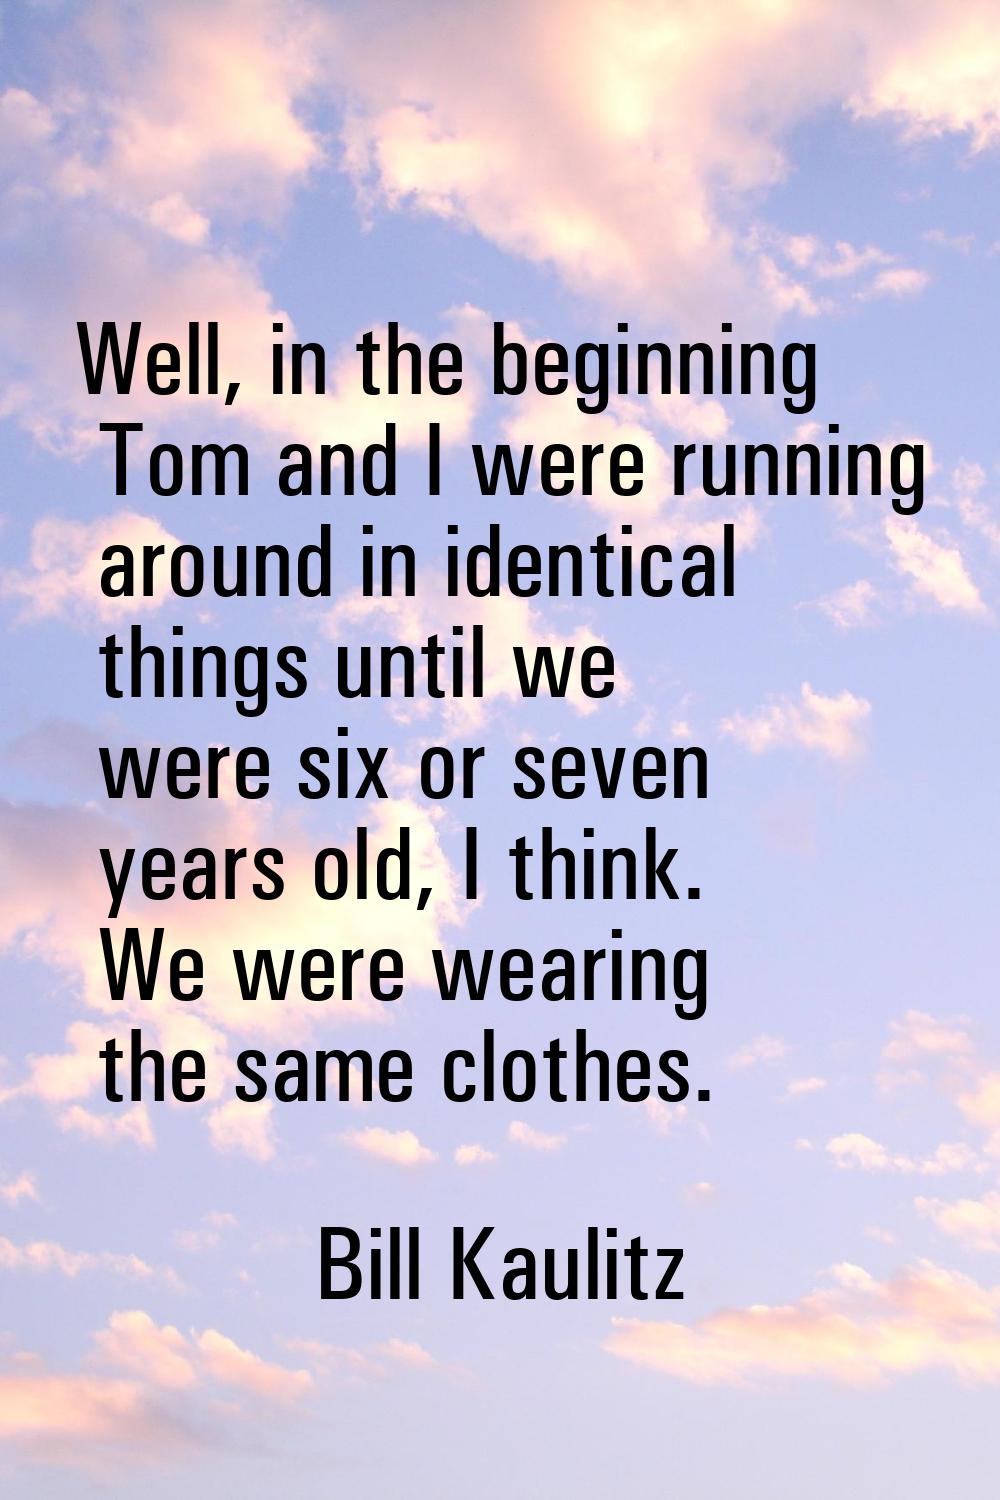 Well, in the beginning Tom and I were running around in identical things until we were six or seven